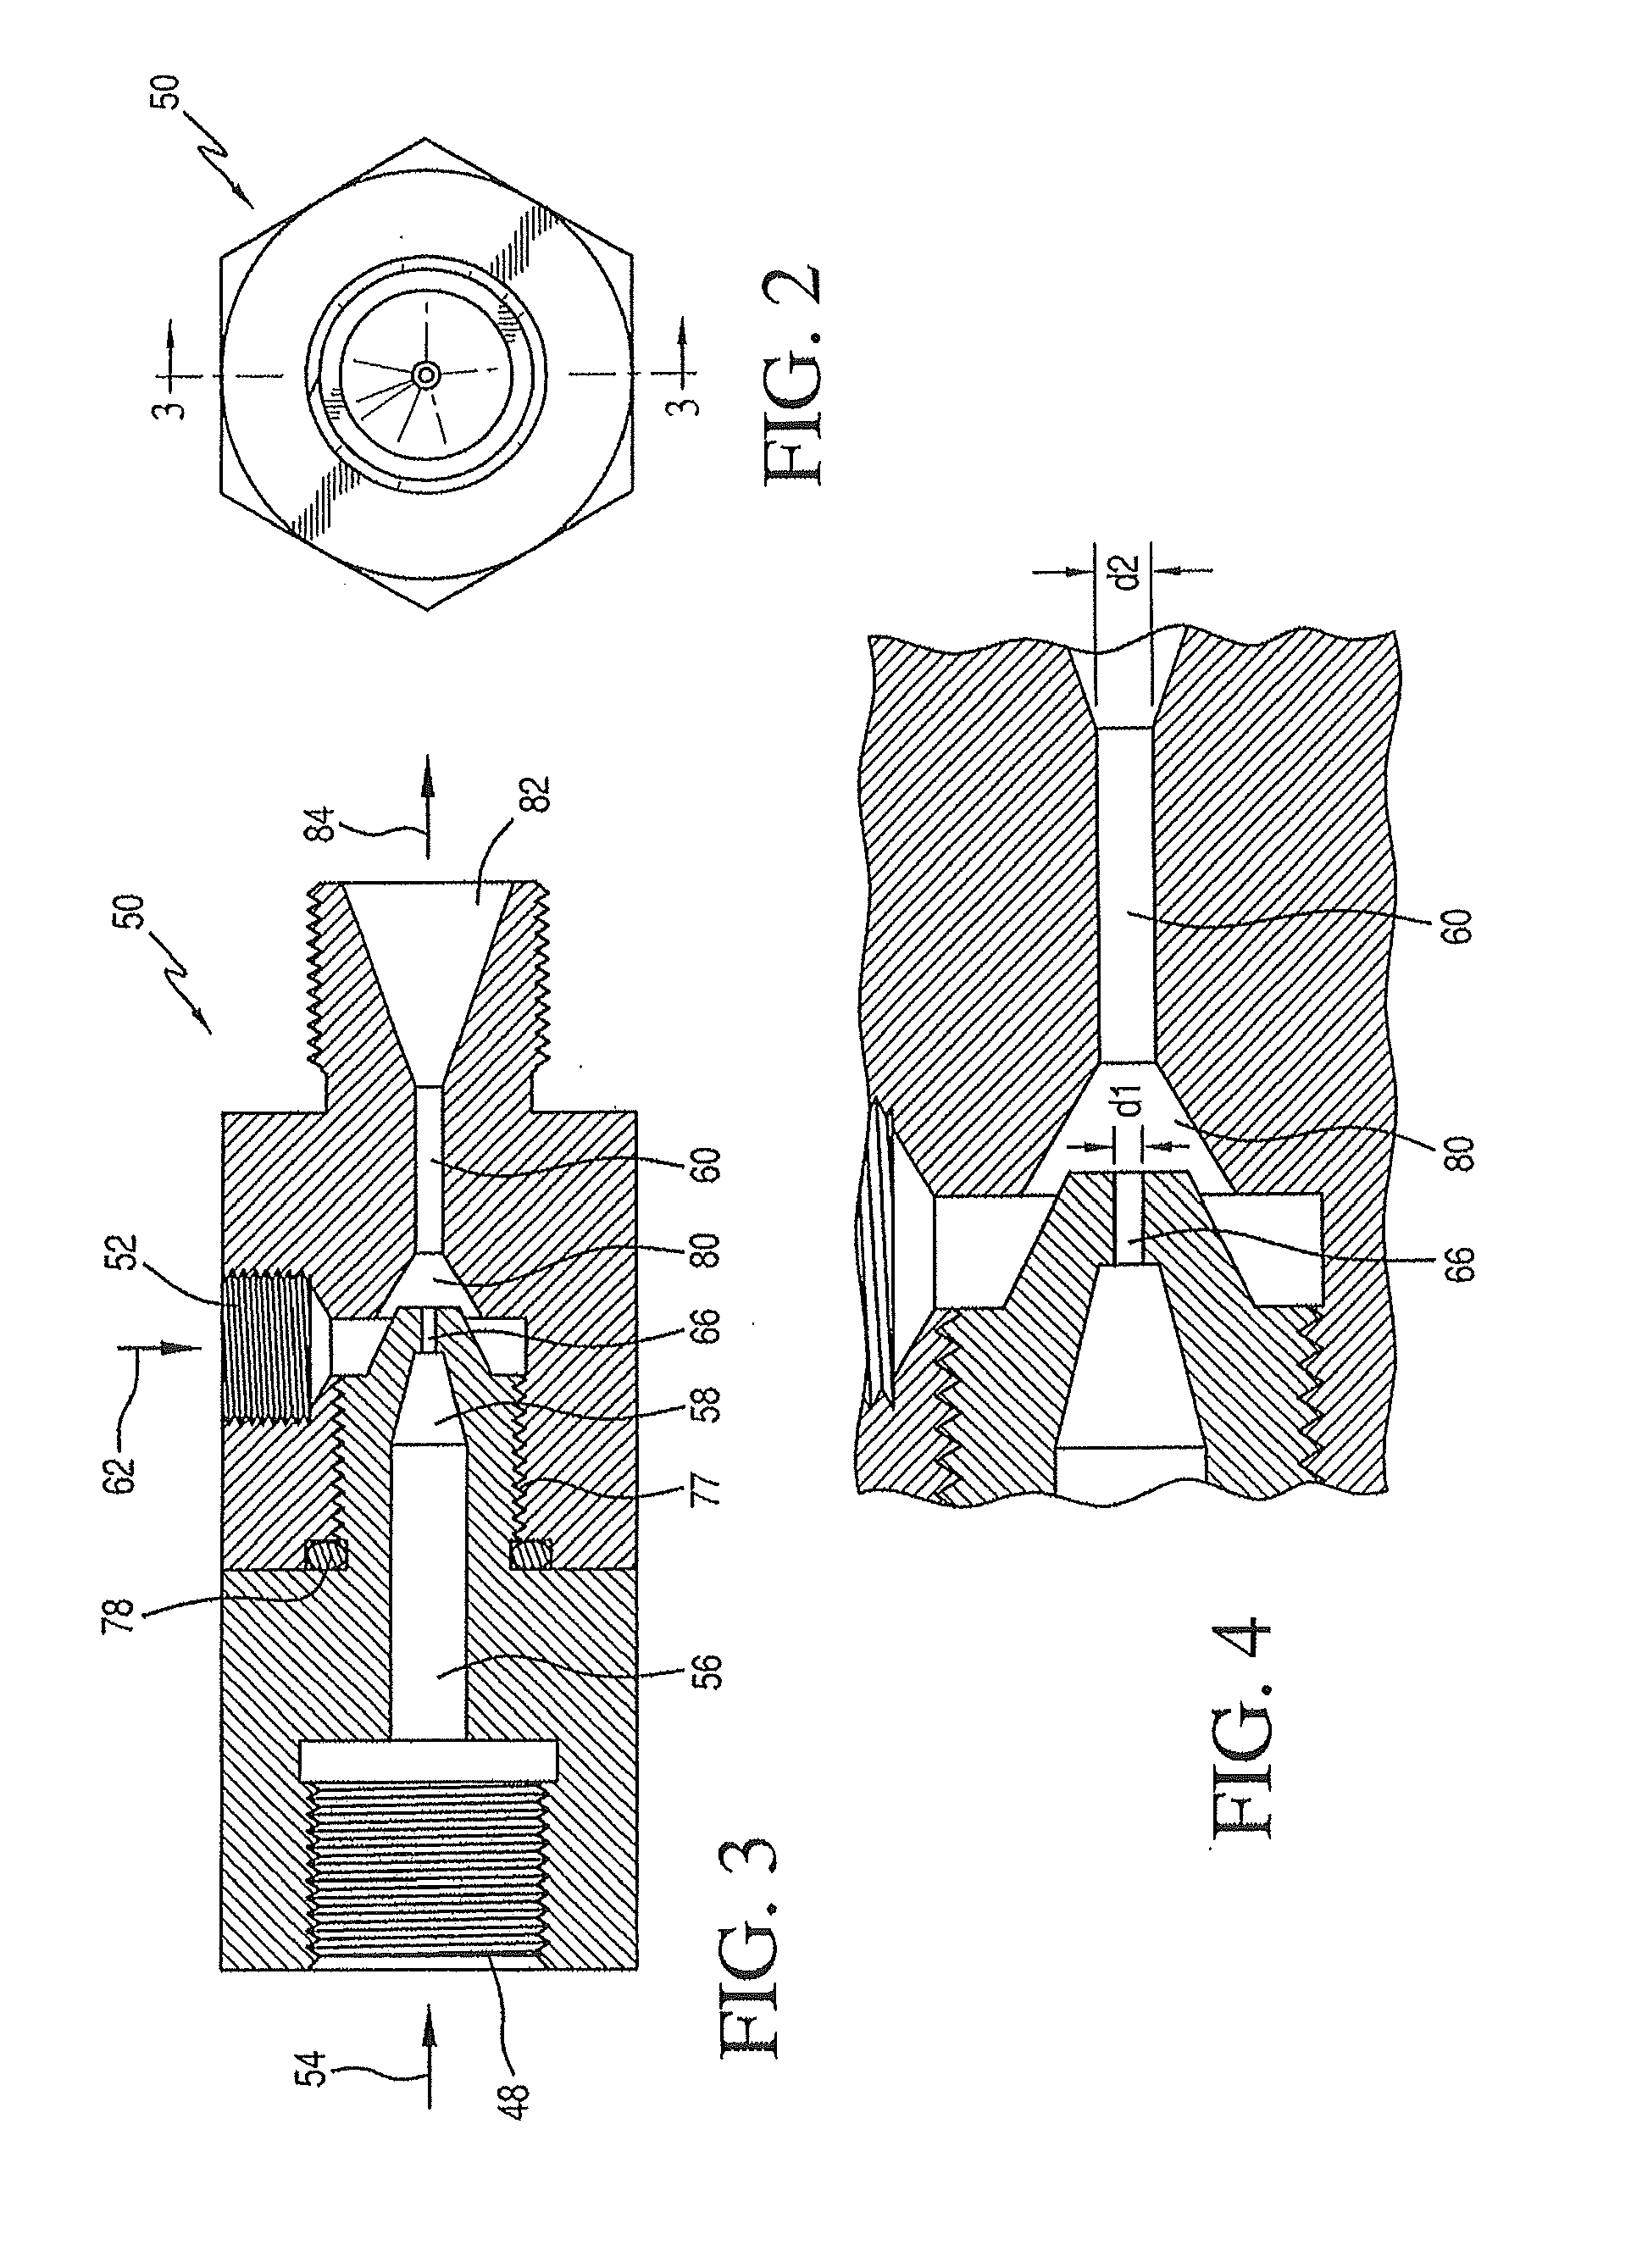 Apparatus, system and method for emulsifying oil and water